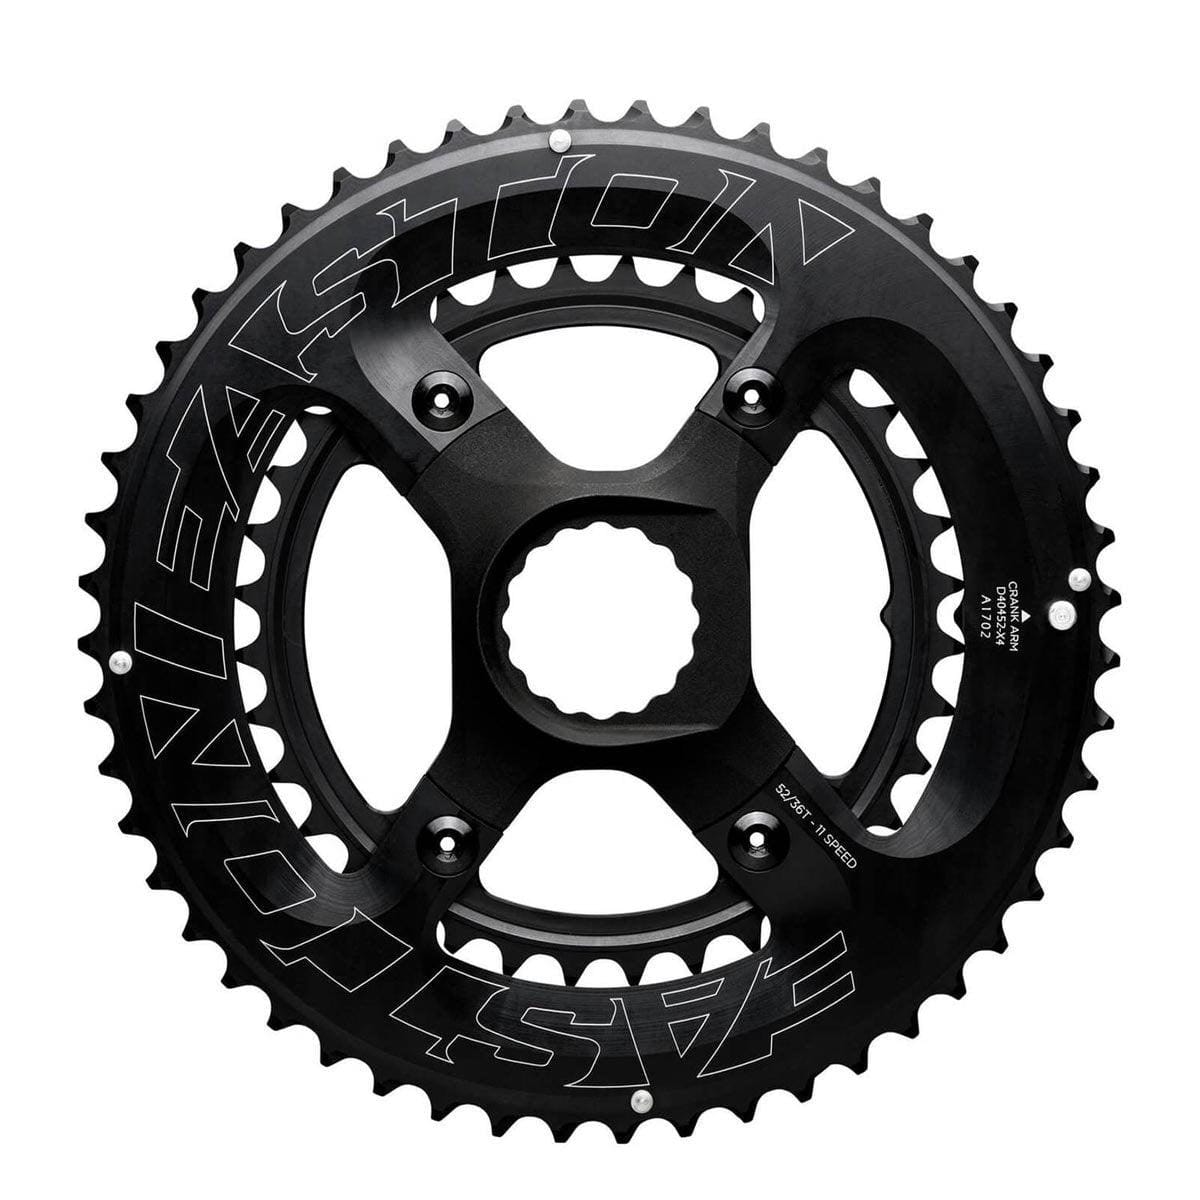 Easton Direct Mount Spider/ Chainrings 52/36t Parts - Chainrings